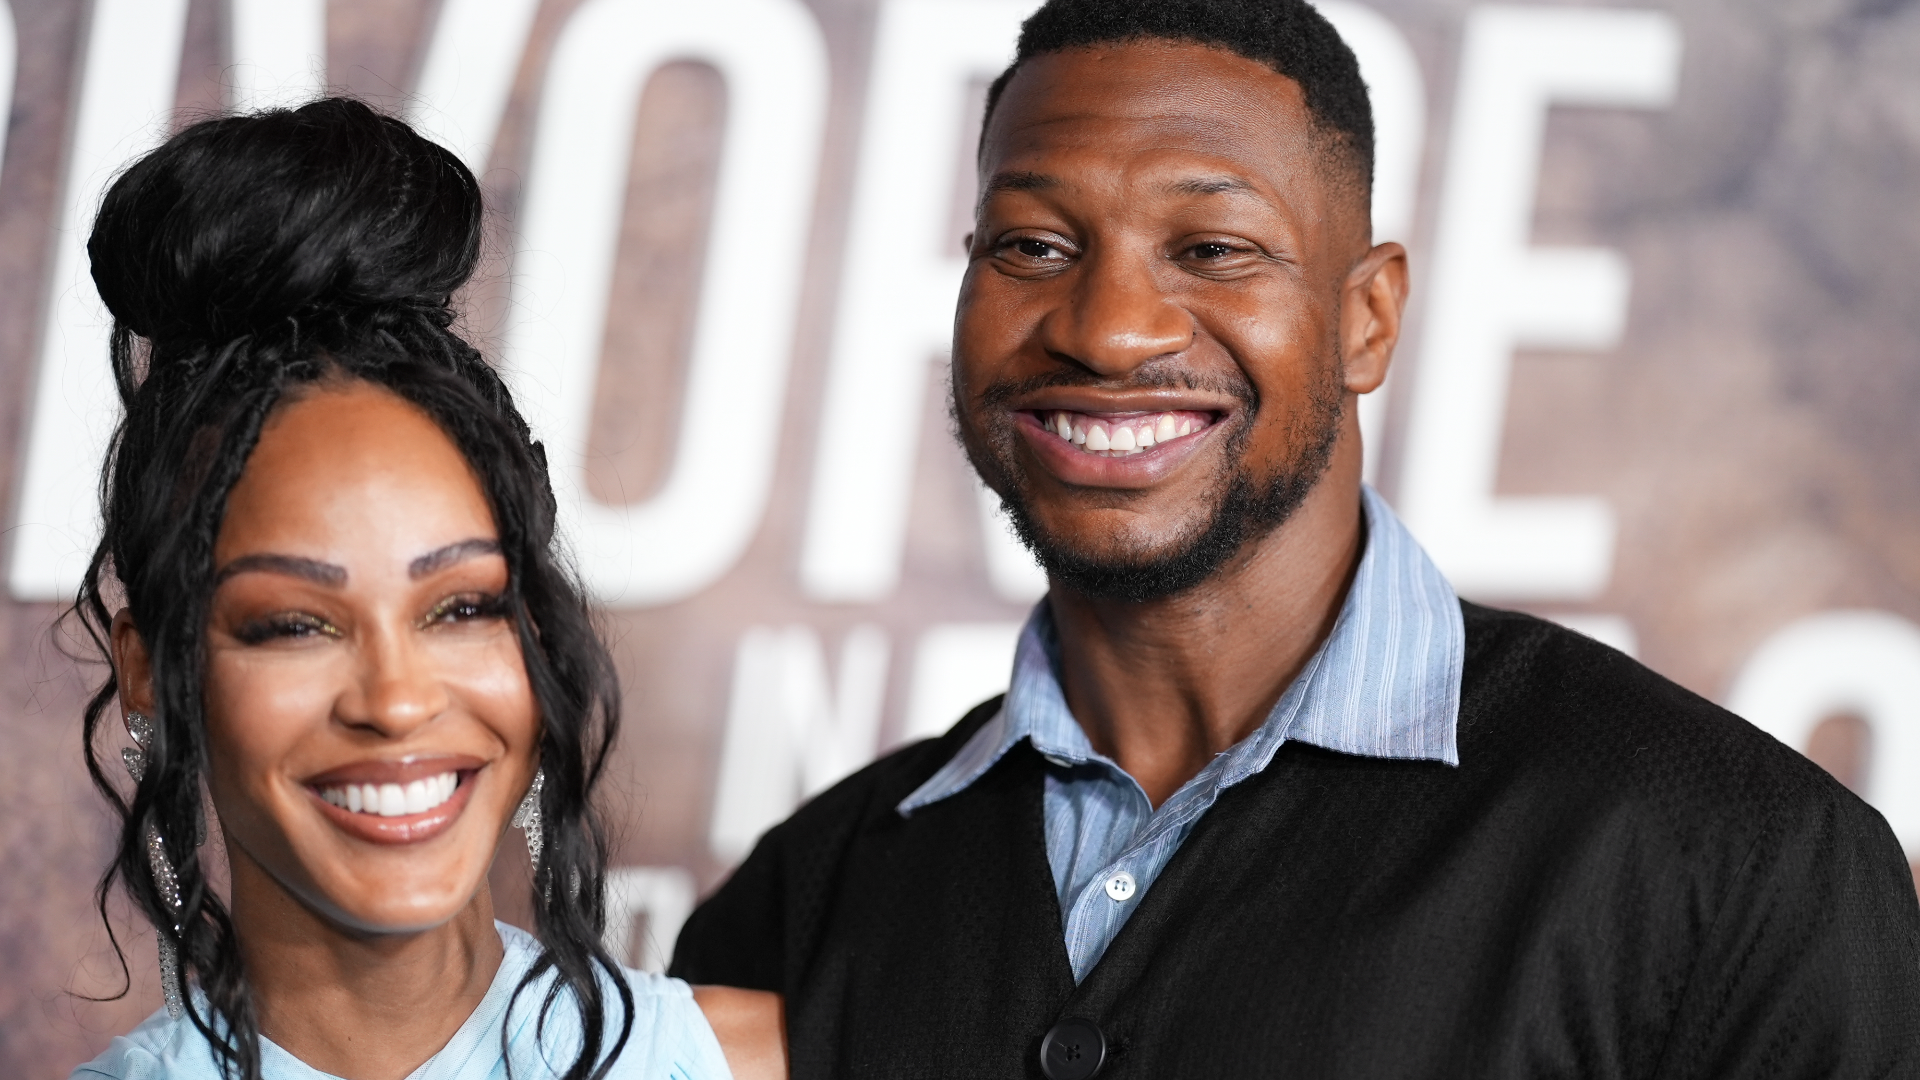 Meagan Good’s Friends Offered Advice On Dating Jonathan Majors Amid Assault Trial